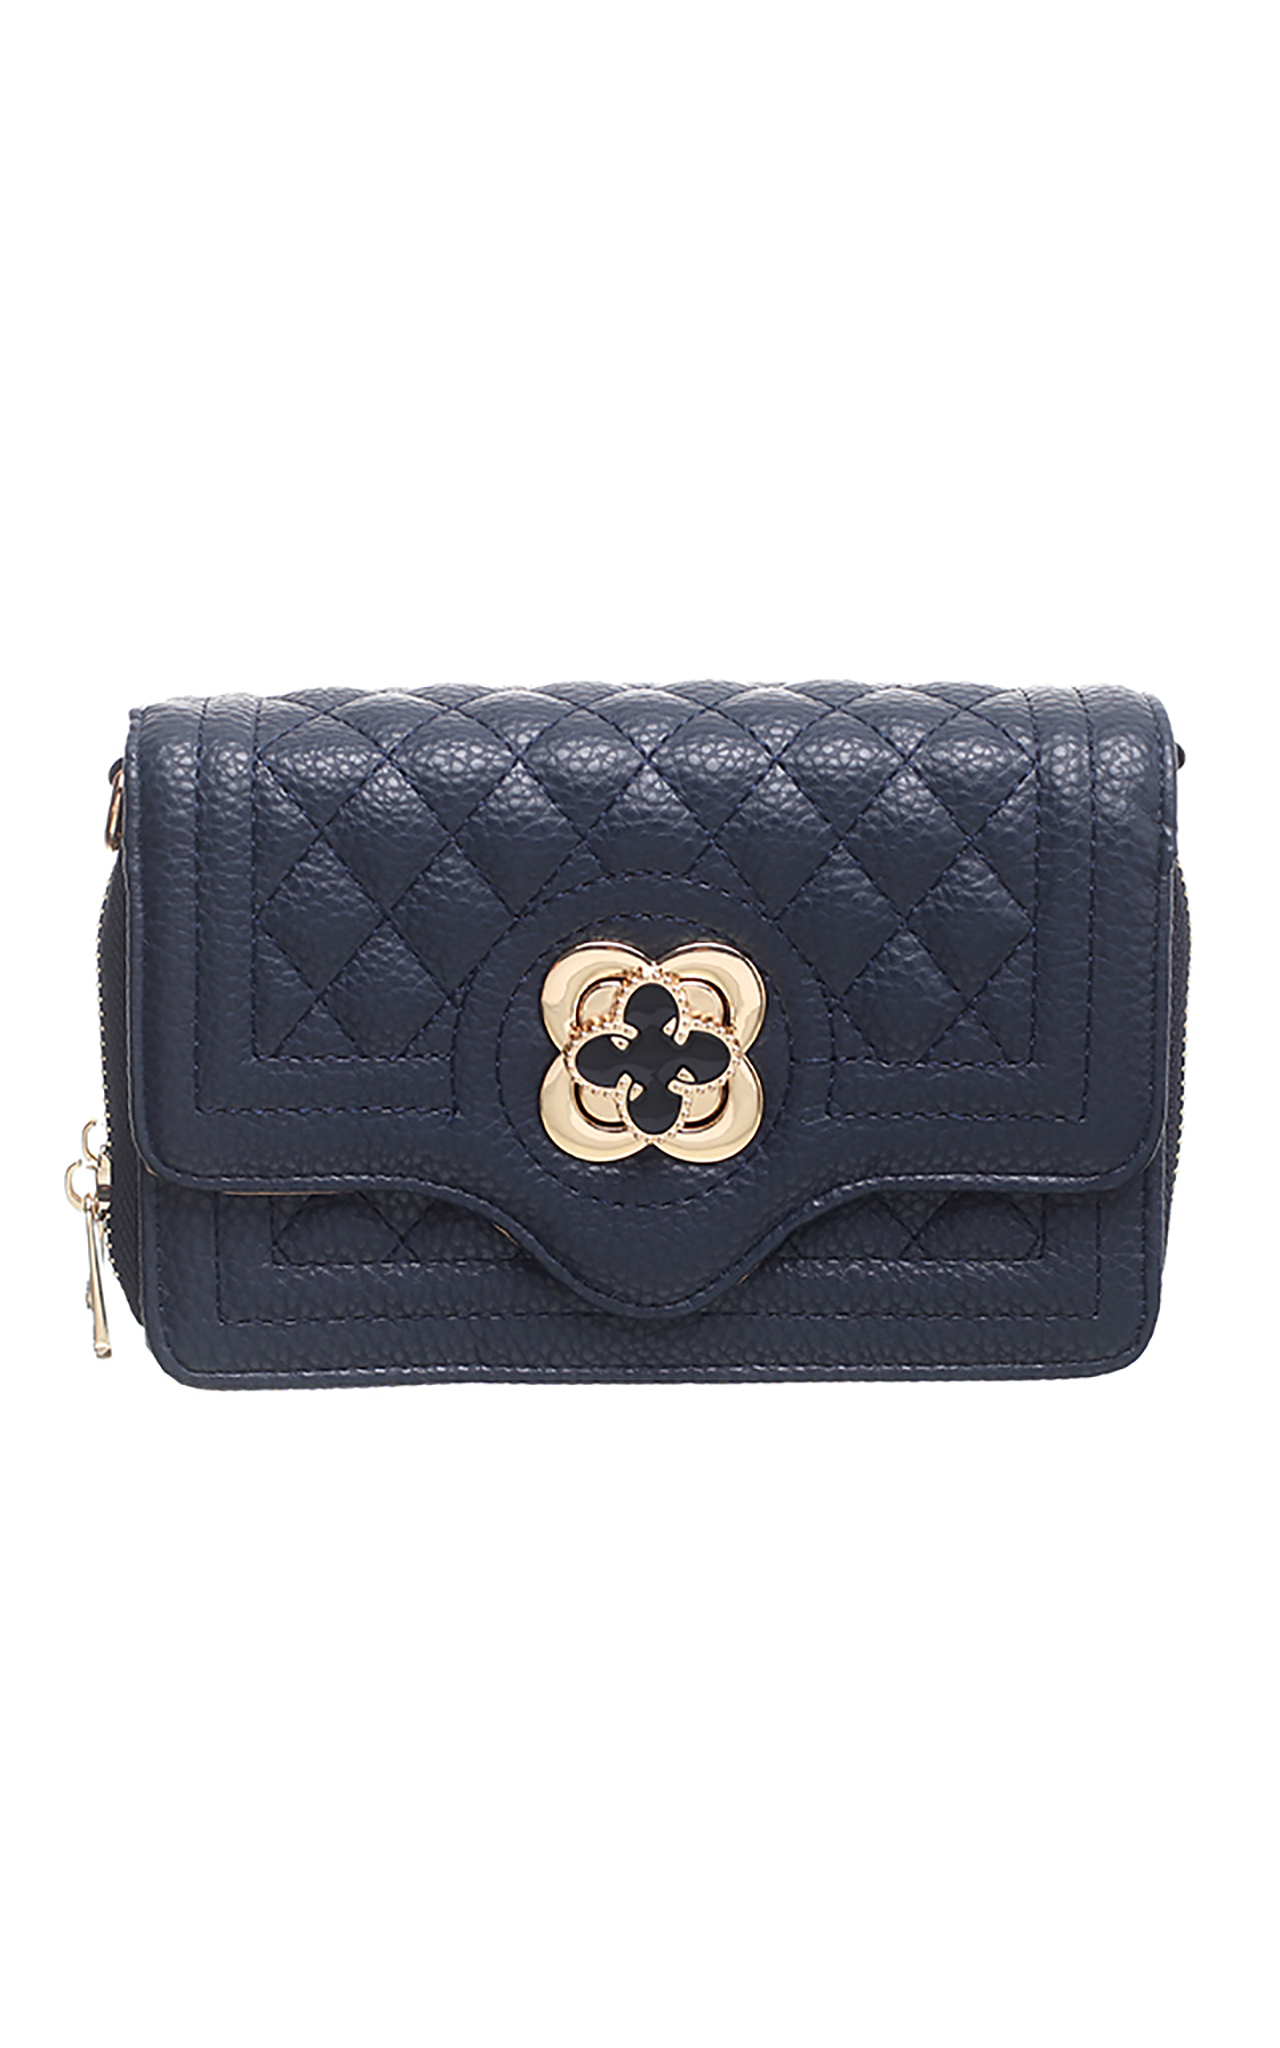 QUILTED FLAP OVER CROSS BODY BAG